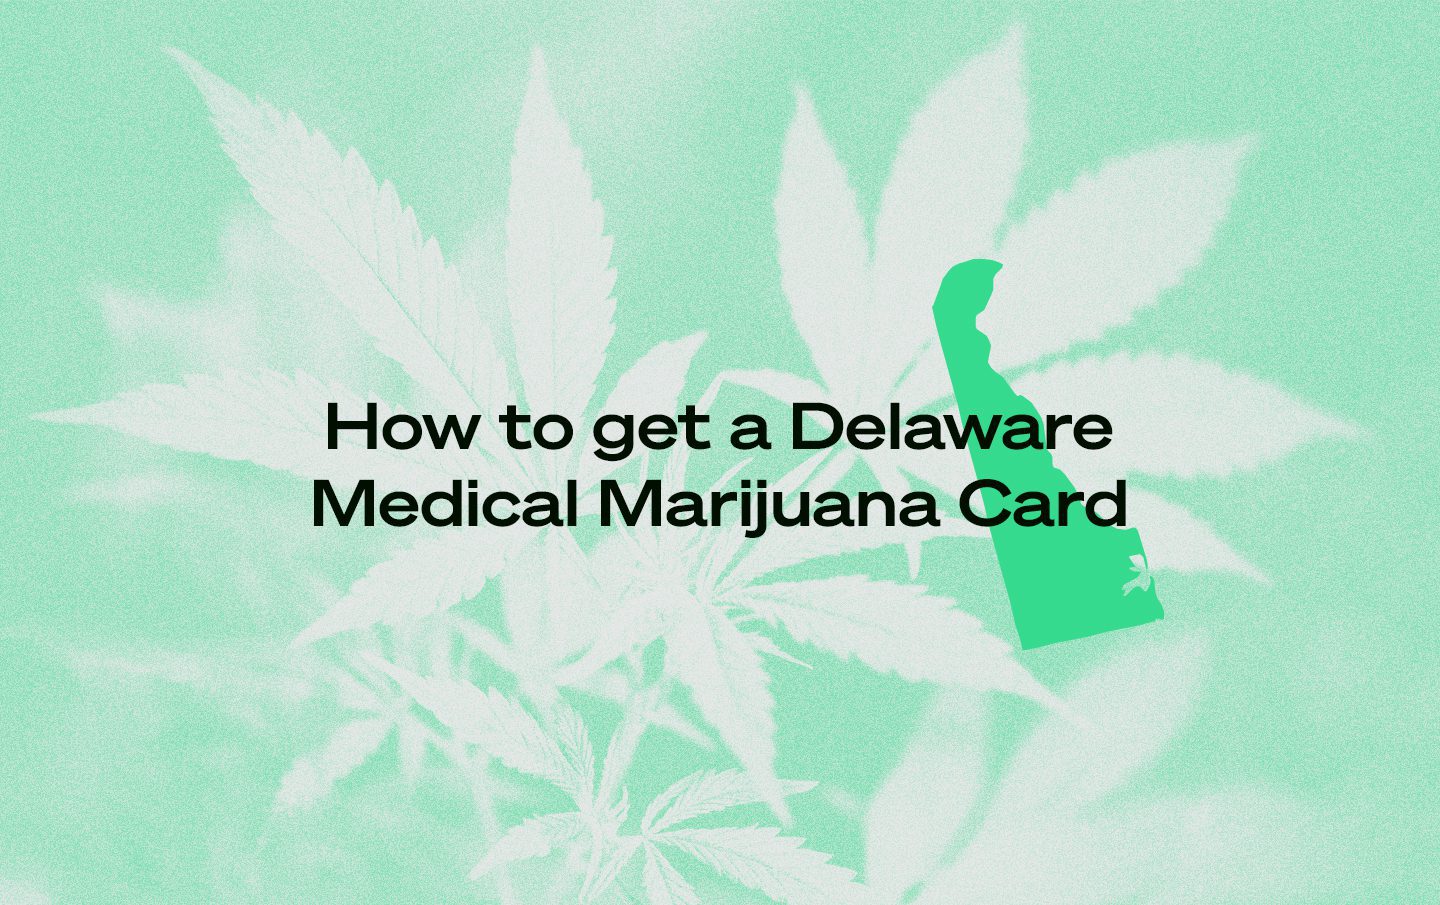 How to get a Delaware medical marijuana card online with Leafwell.